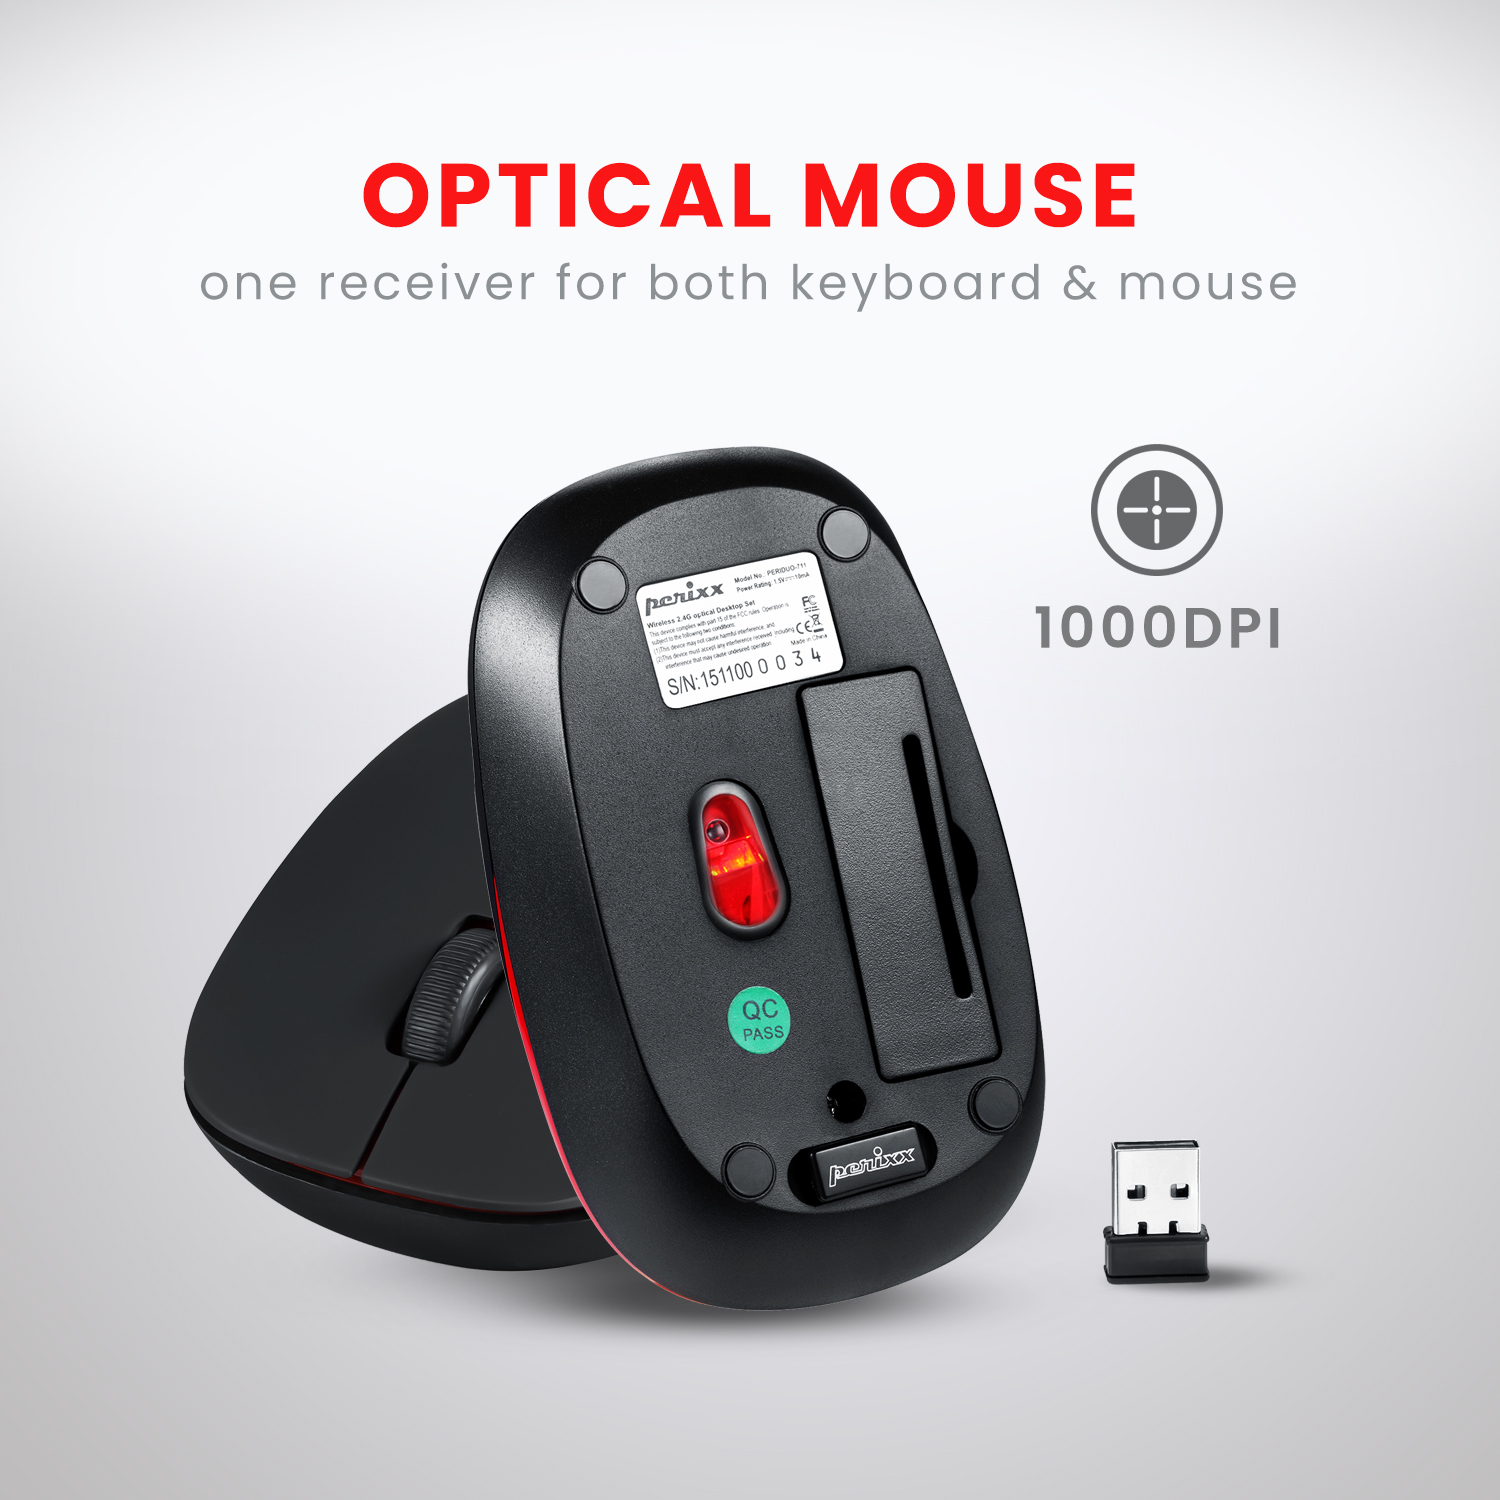 Comfortable Compact Mouse